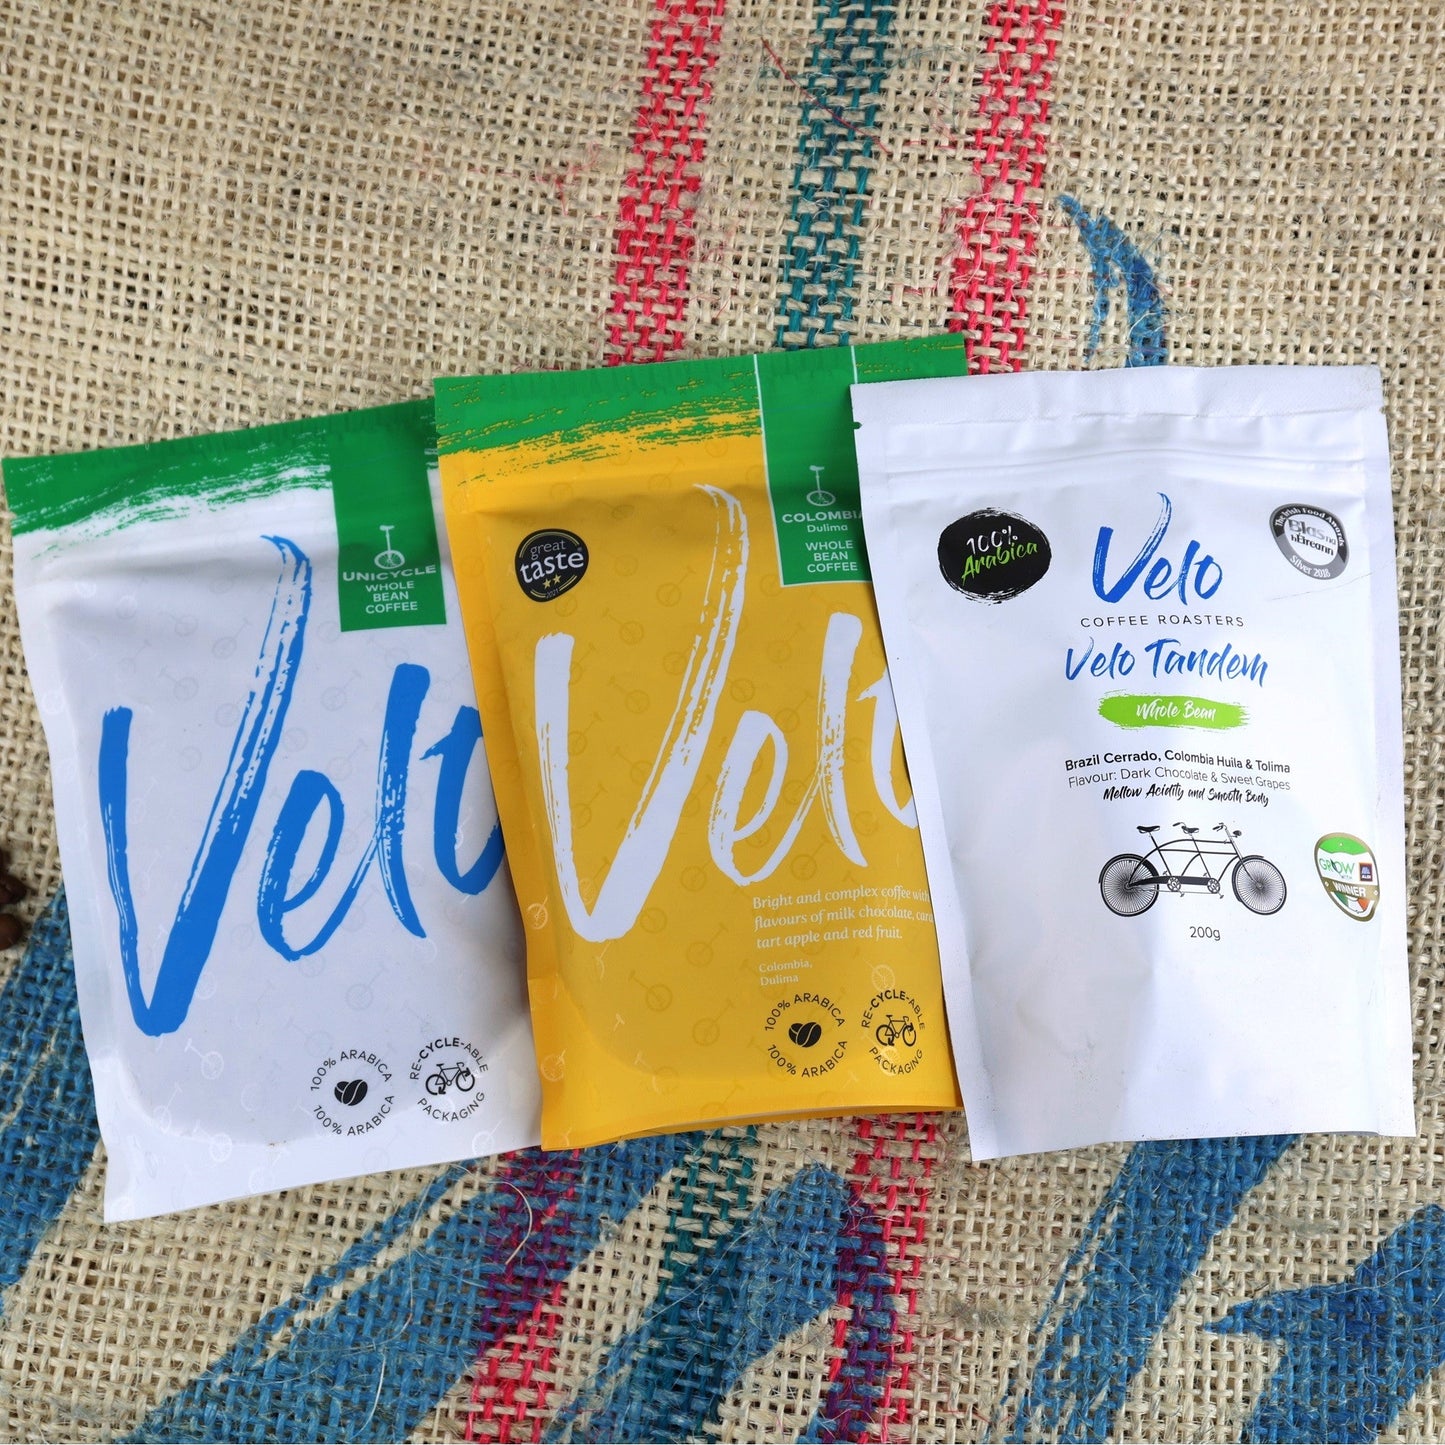 Brazil 200g, Colombia 200g, and Tandem 200g Coffee Bag Bundle - Velo Coffee Roasters